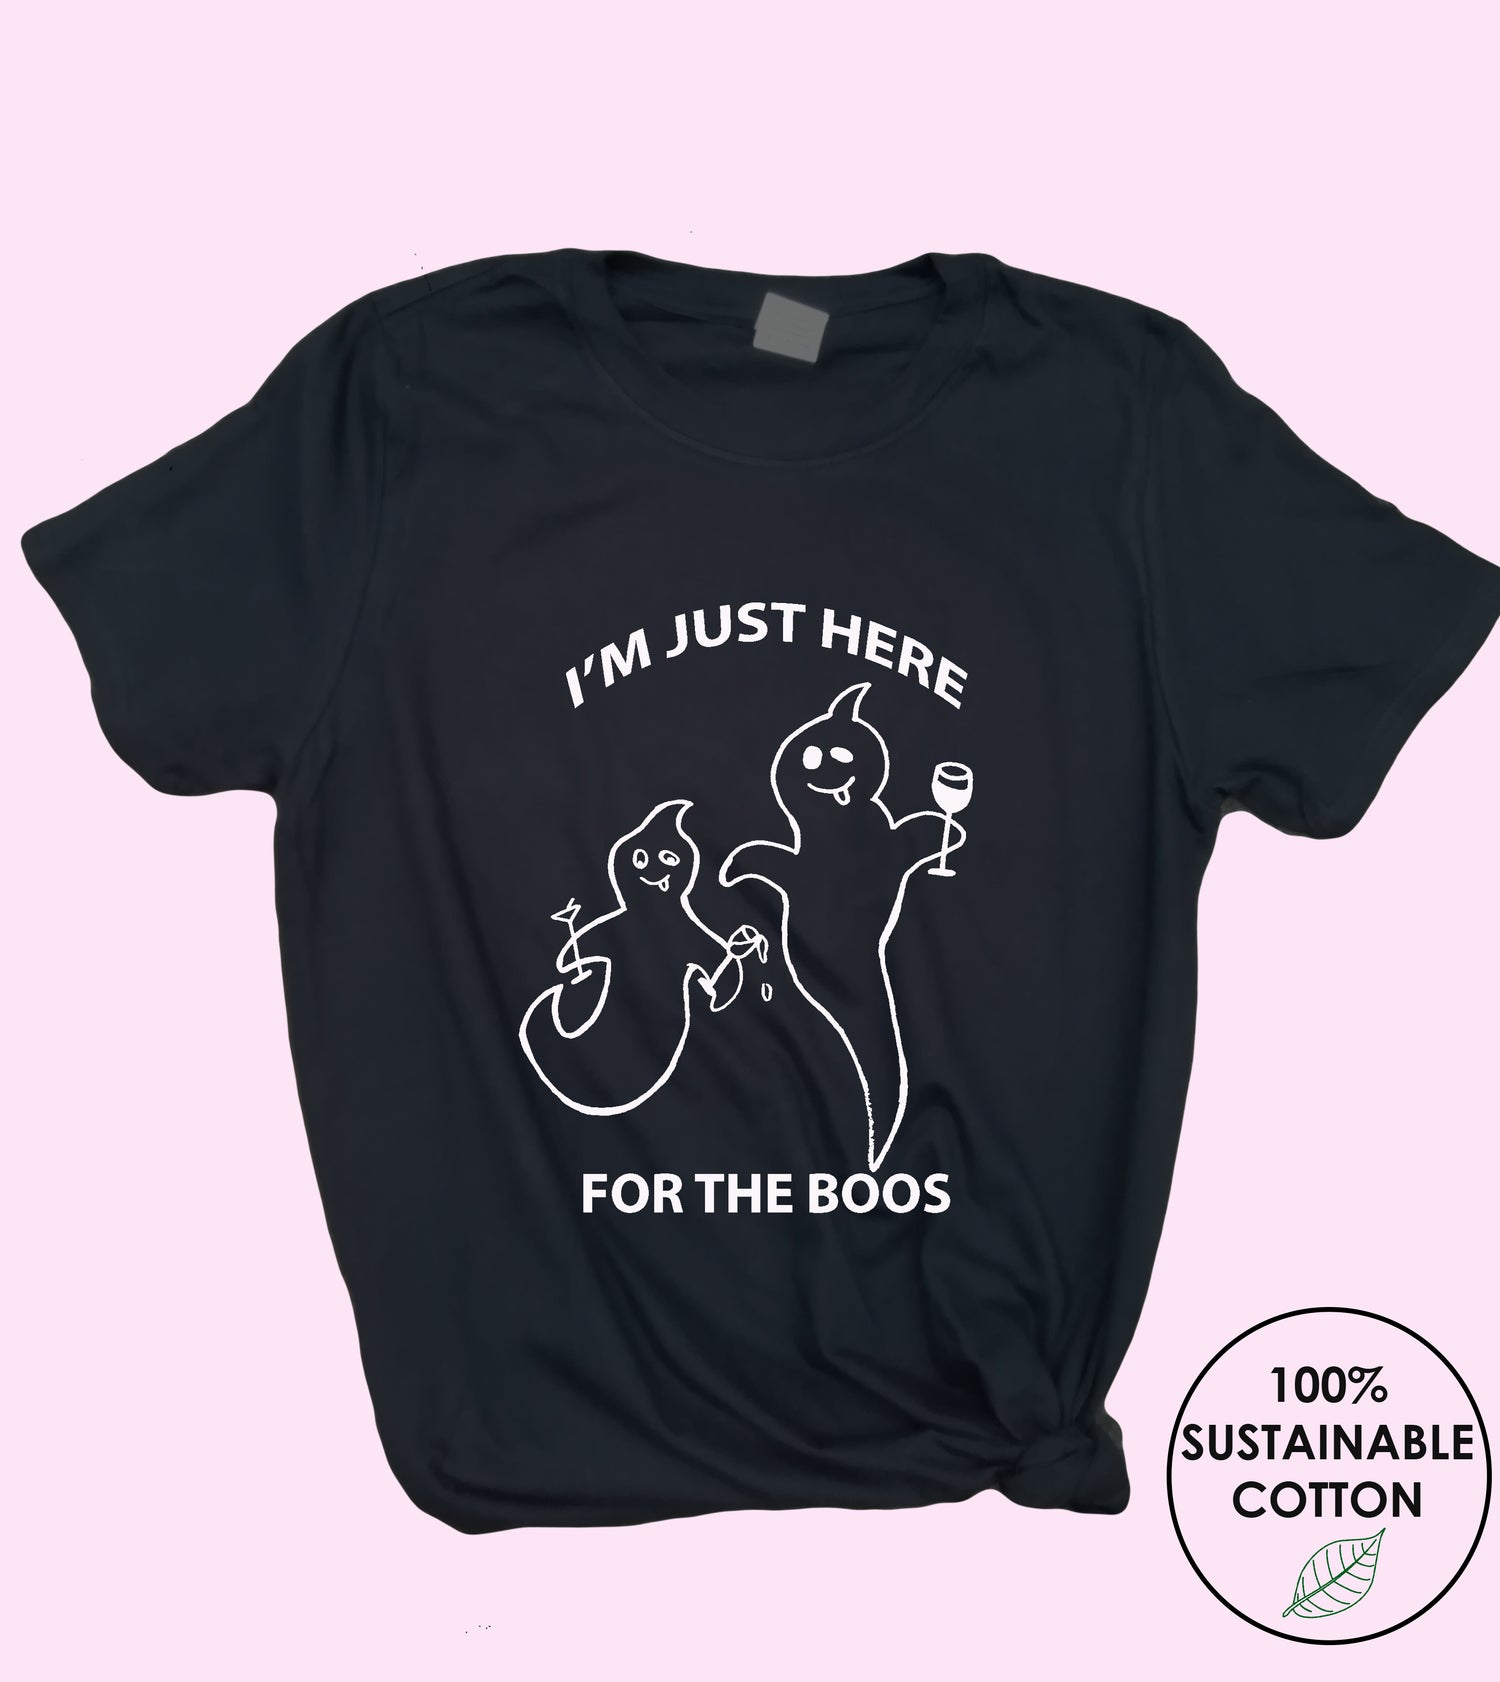 I'm just here for the boos T Shirt - Cotton - Unisex